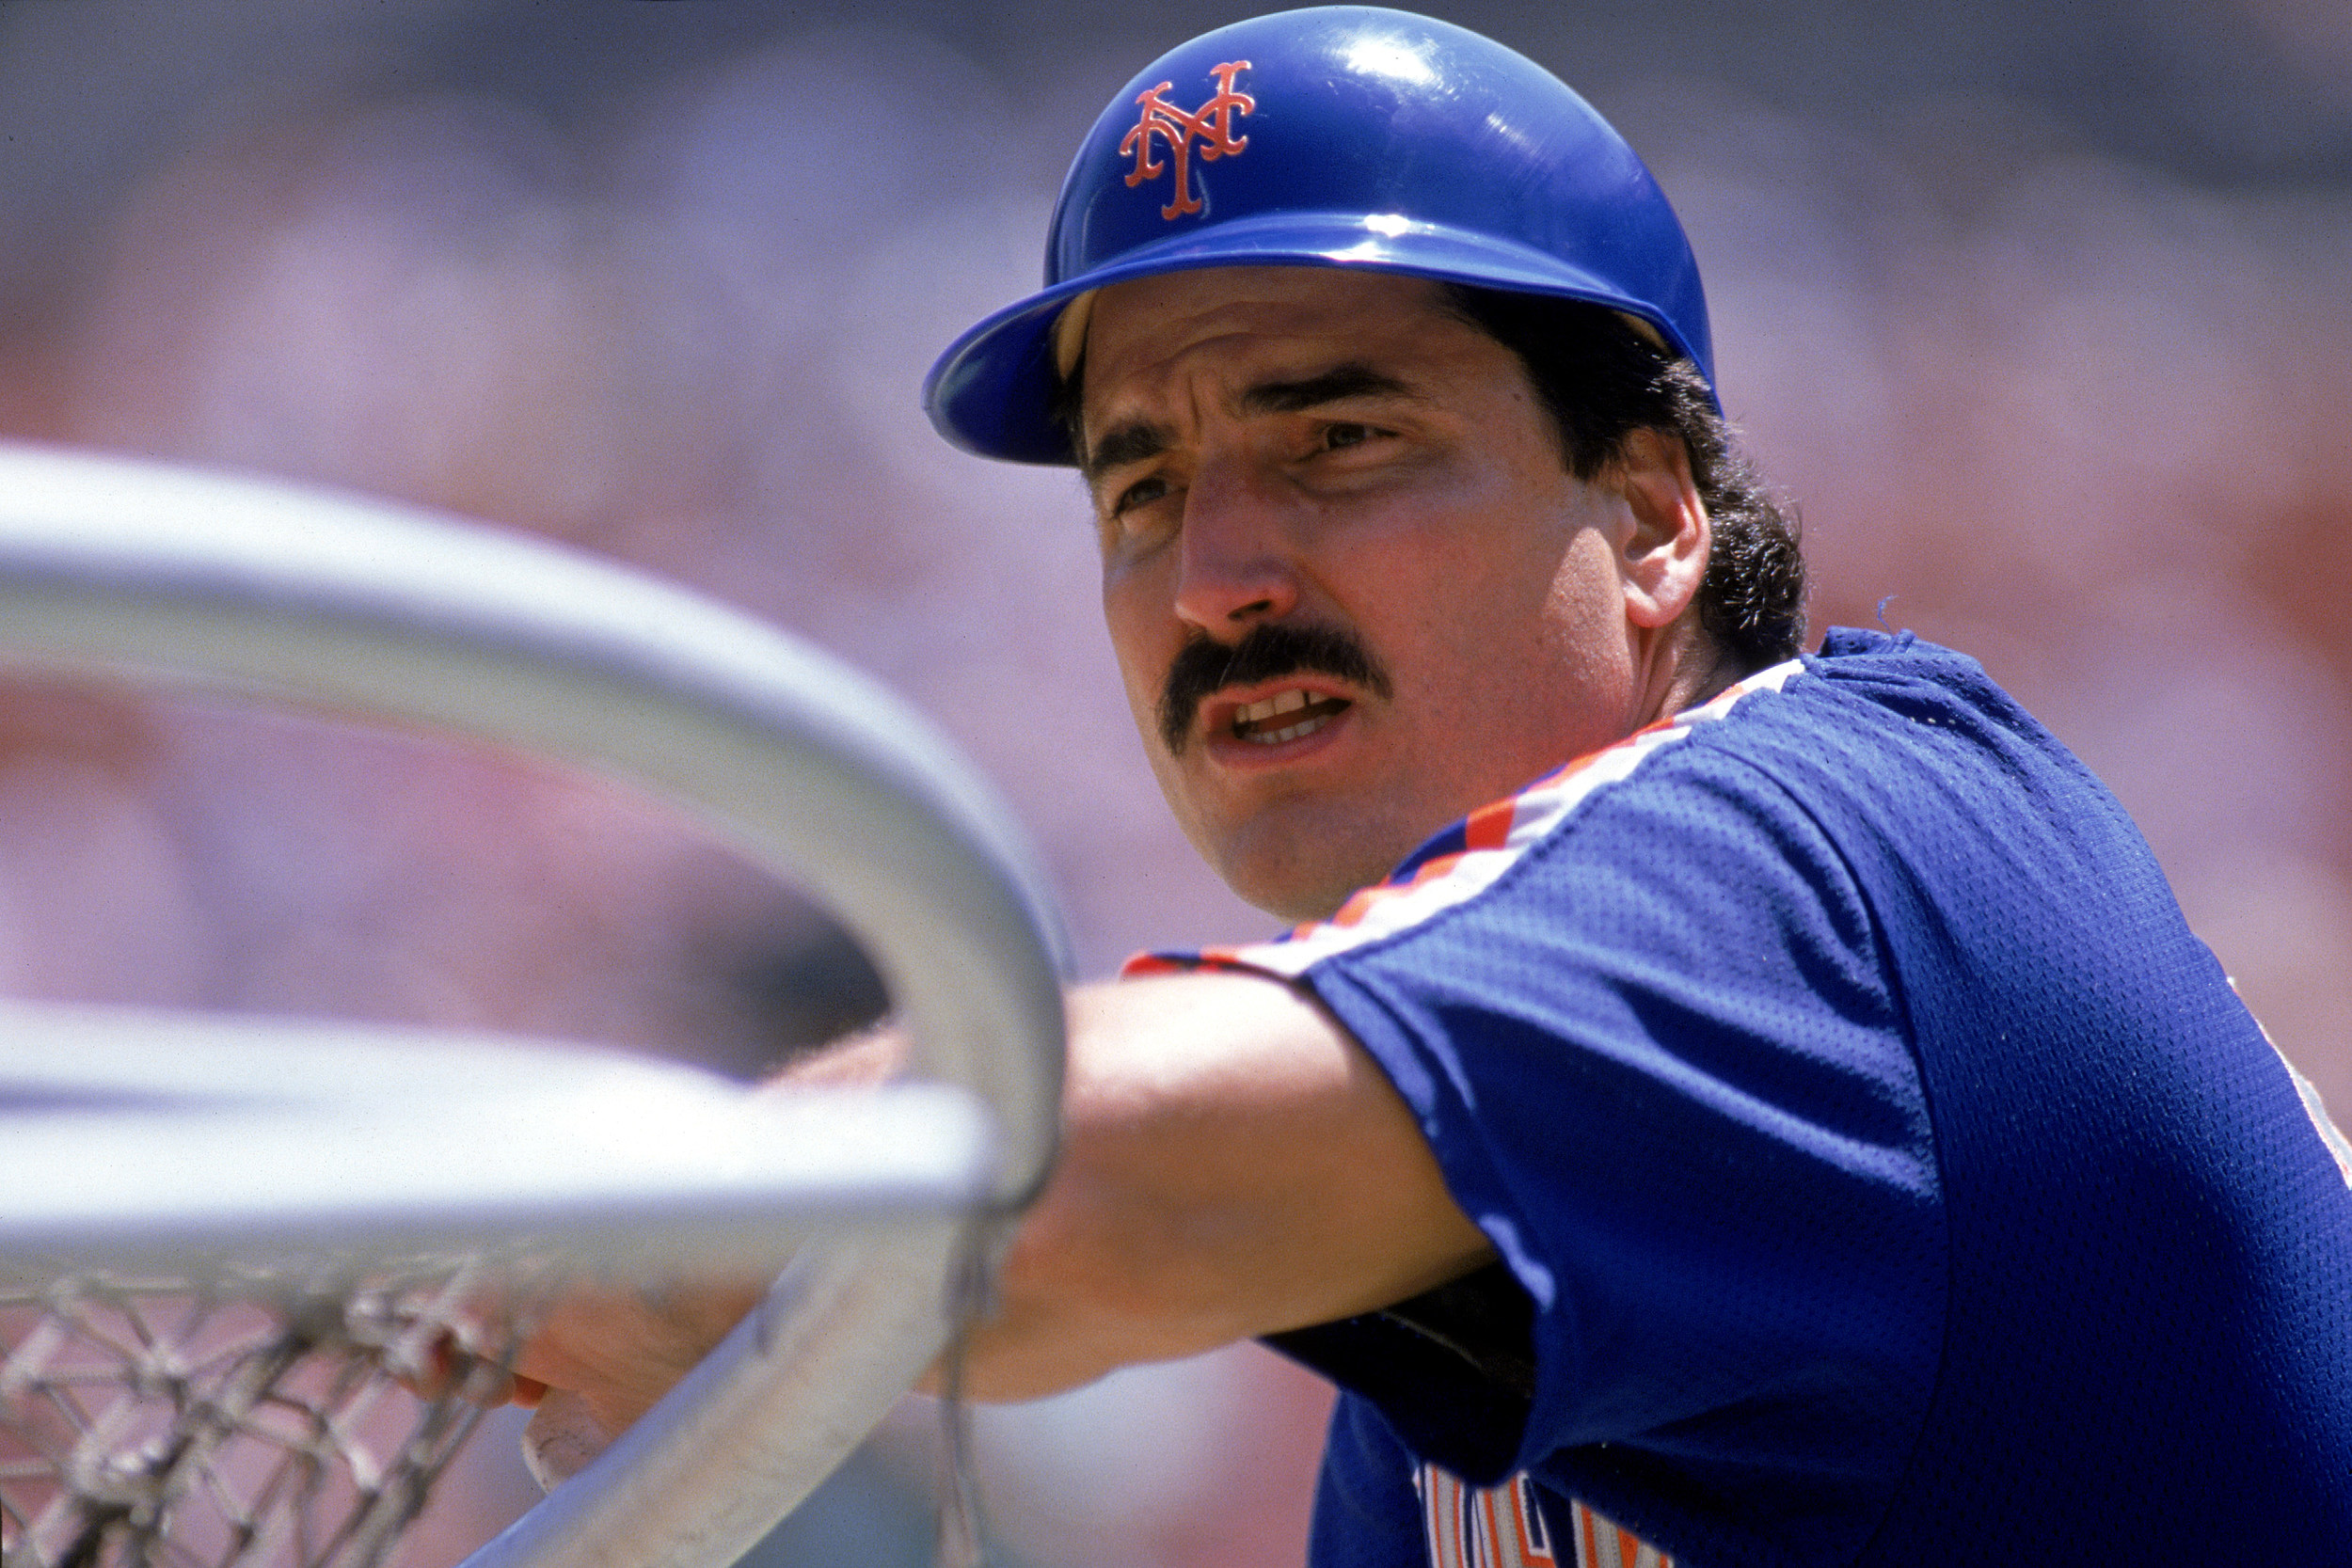 Mets Honor Keith Hernandez With Number Retirement Ceremony